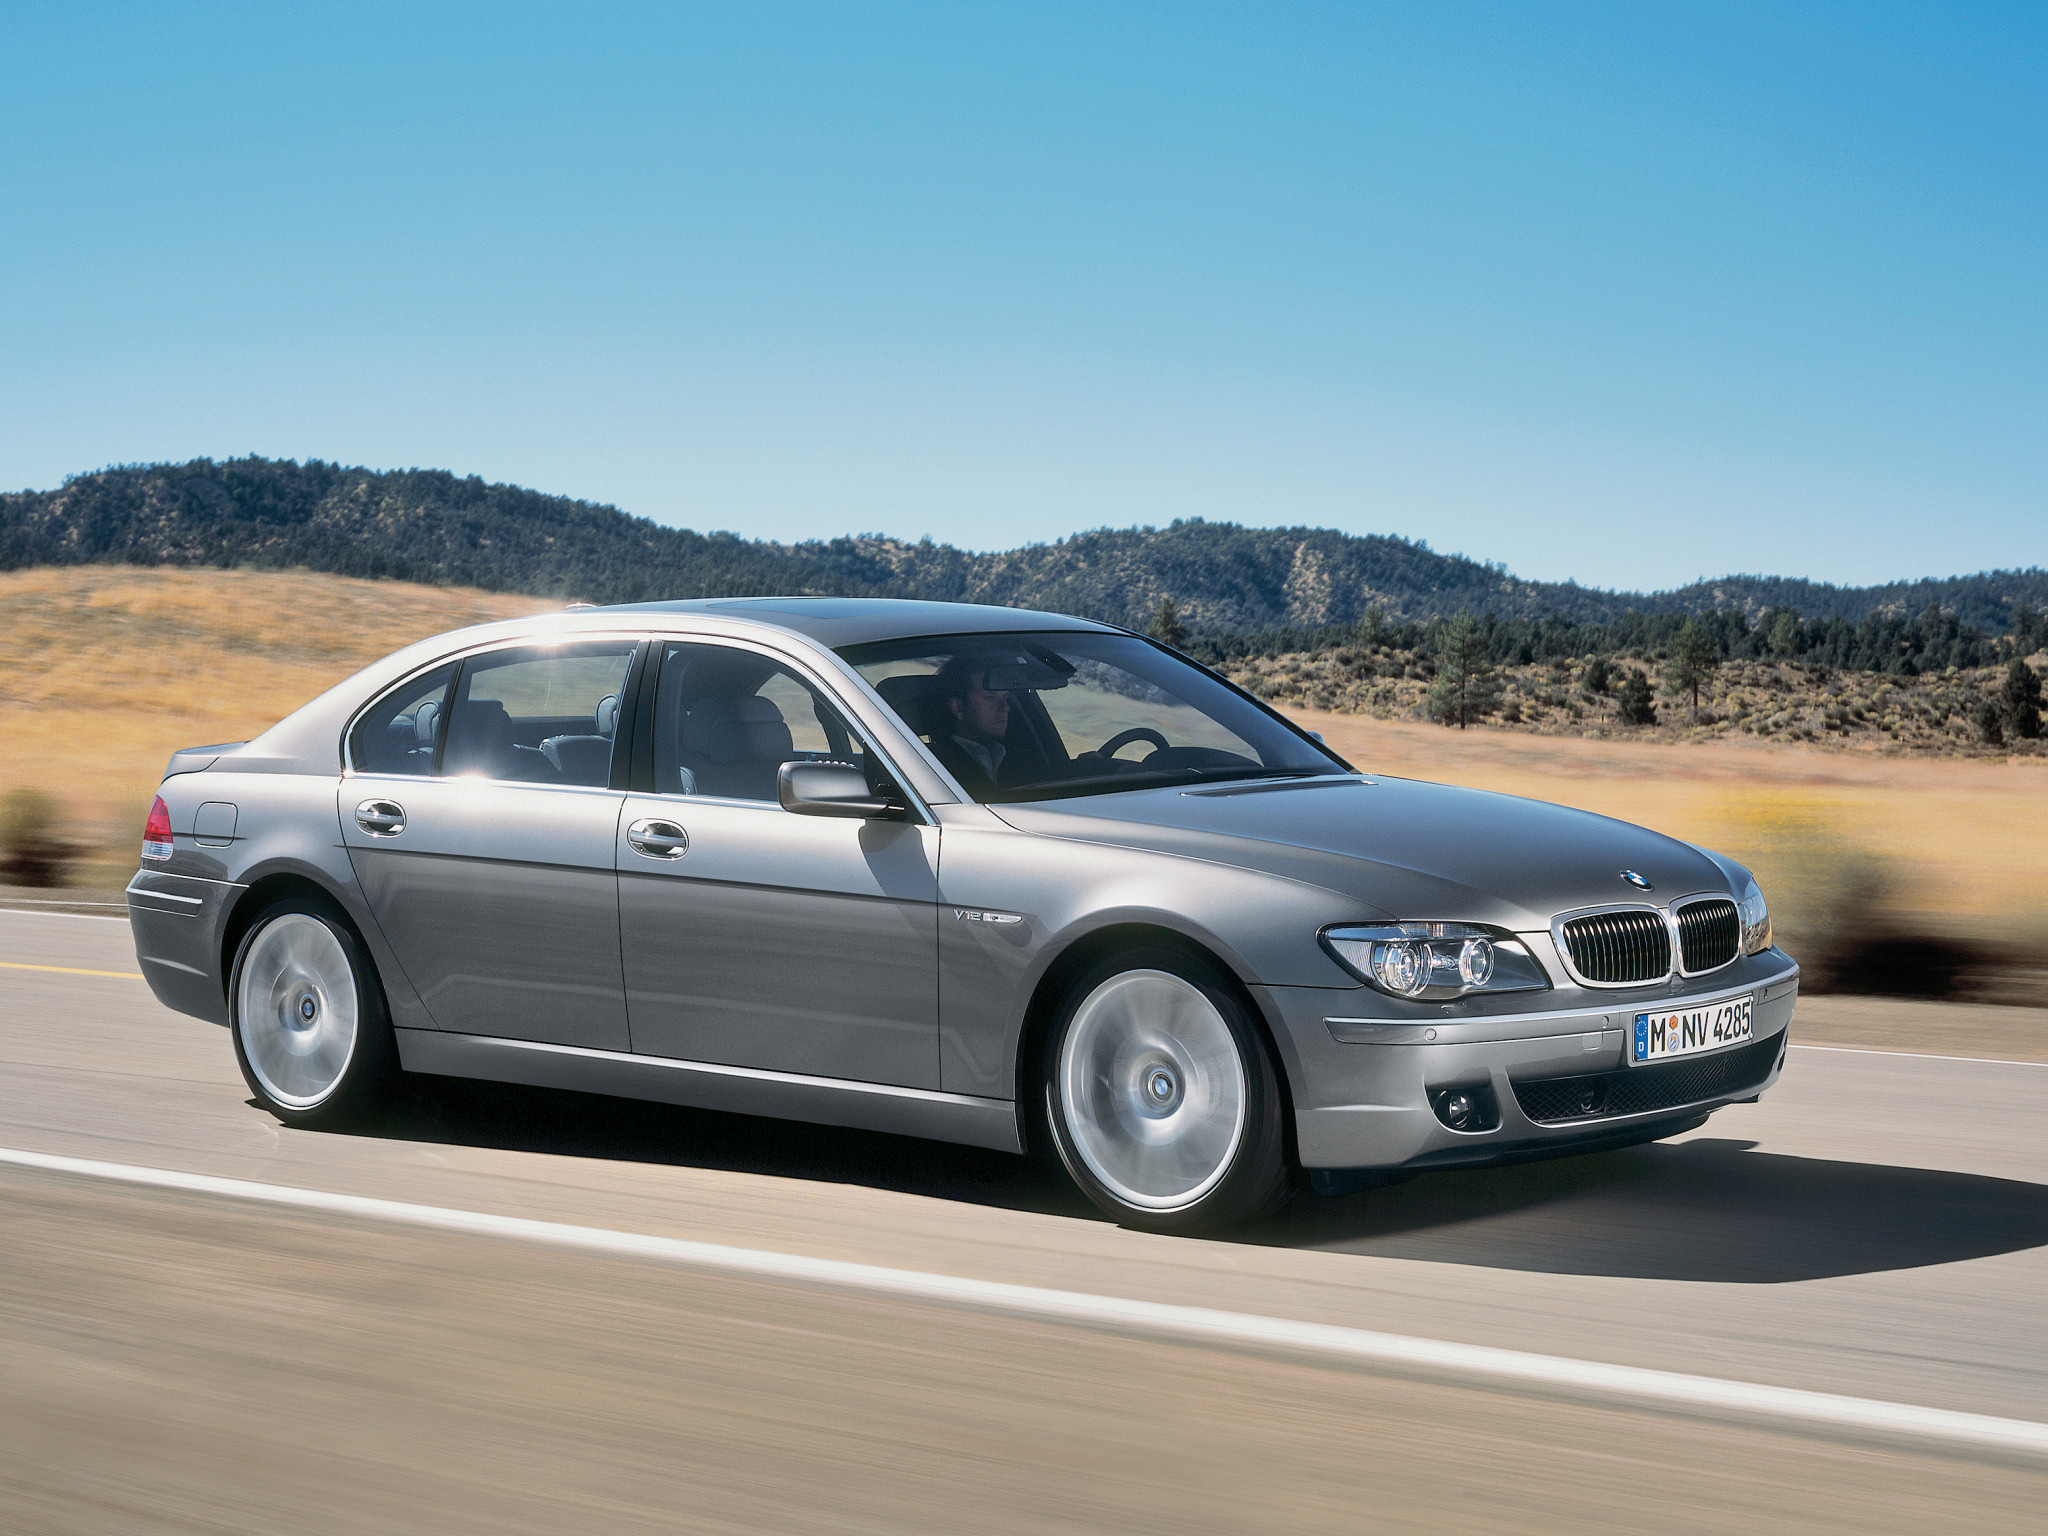 Alarming Tame allocation Buyer's Guide: The Infamous BMW E65 / E66 7 Series